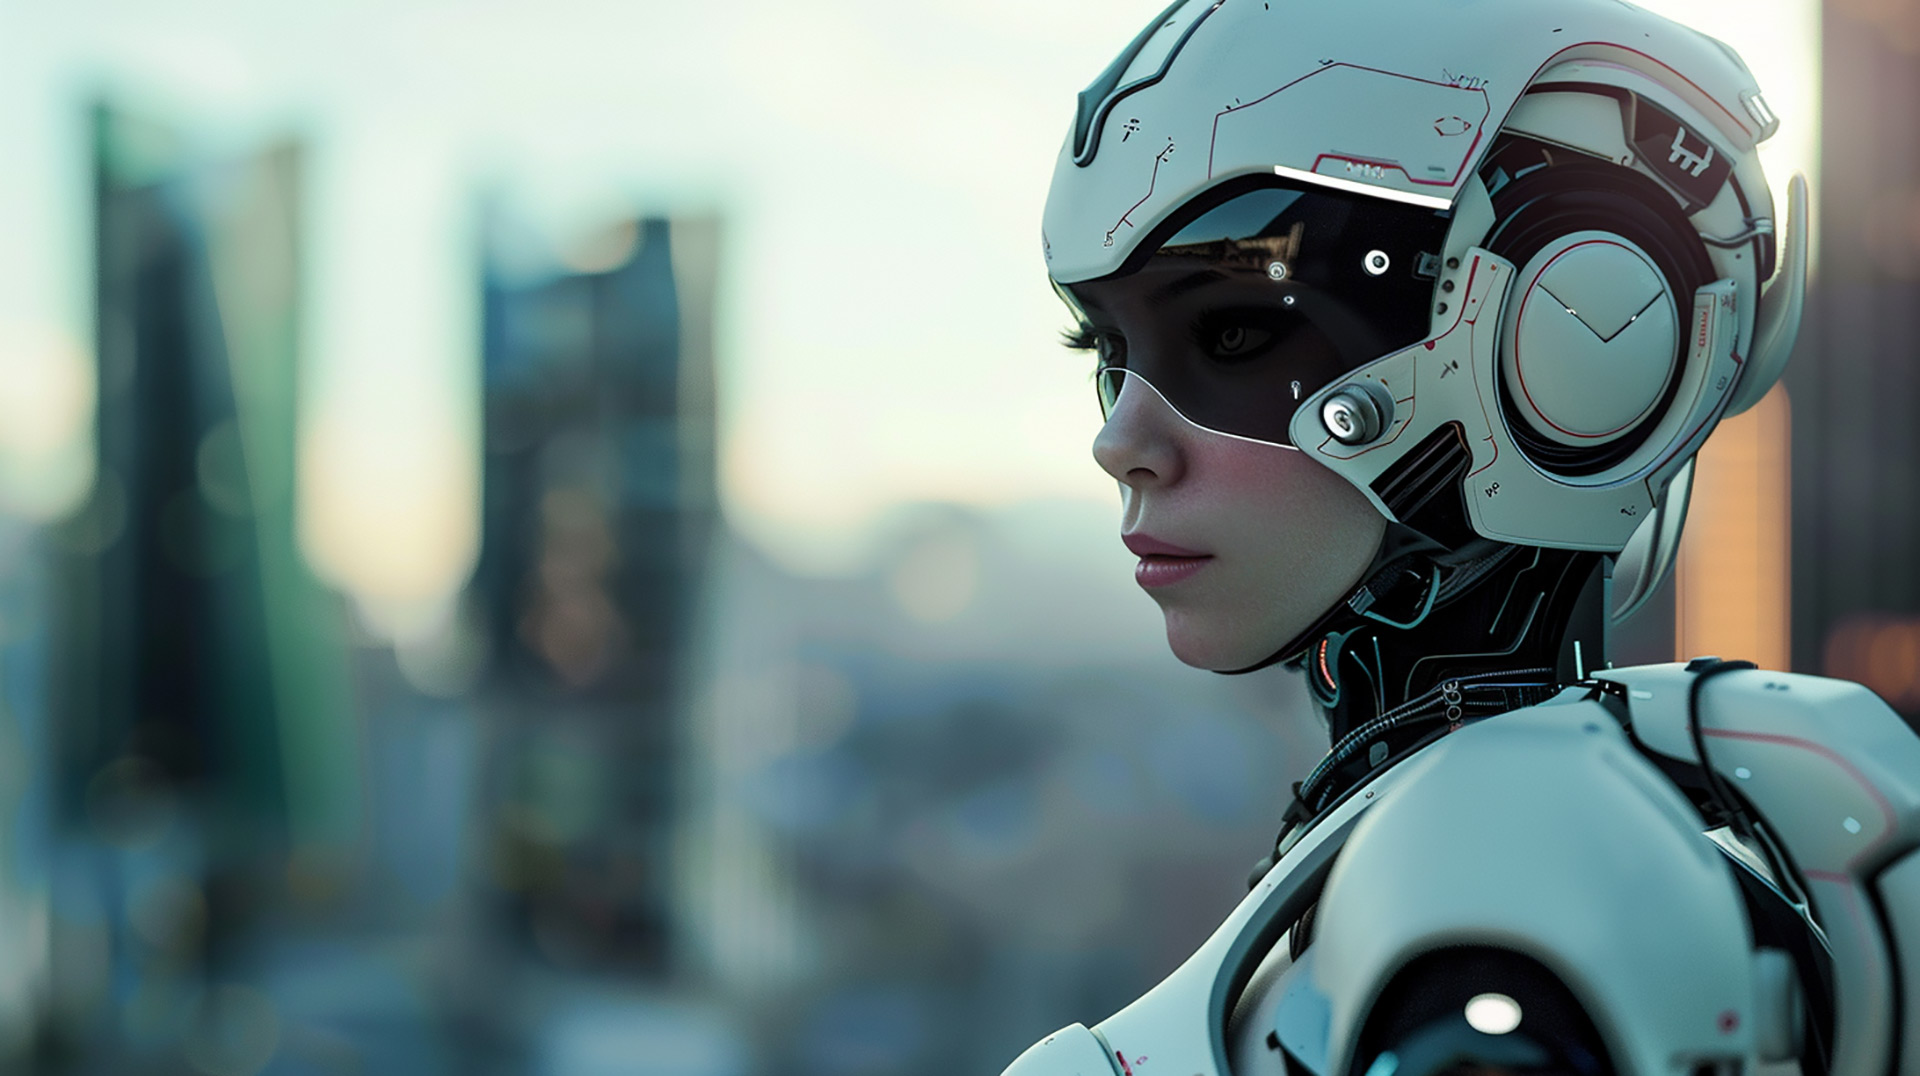 Silicon Dreams: Stylish Robot Girl Scenes in High Resolution